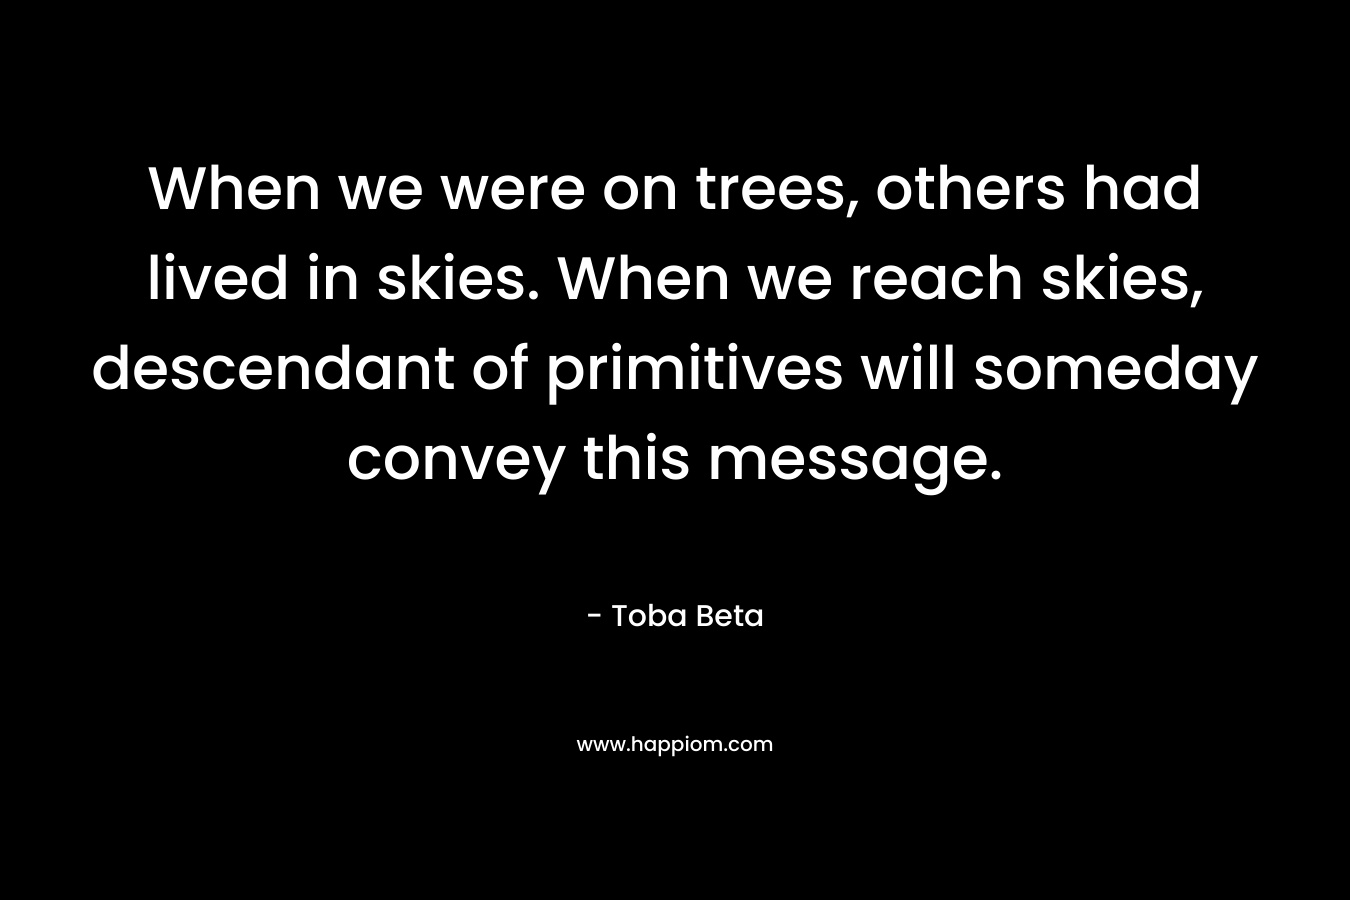 When we were on trees, others had lived in skies. When we reach skies, descendant of primitives will someday convey this message. – Toba Beta